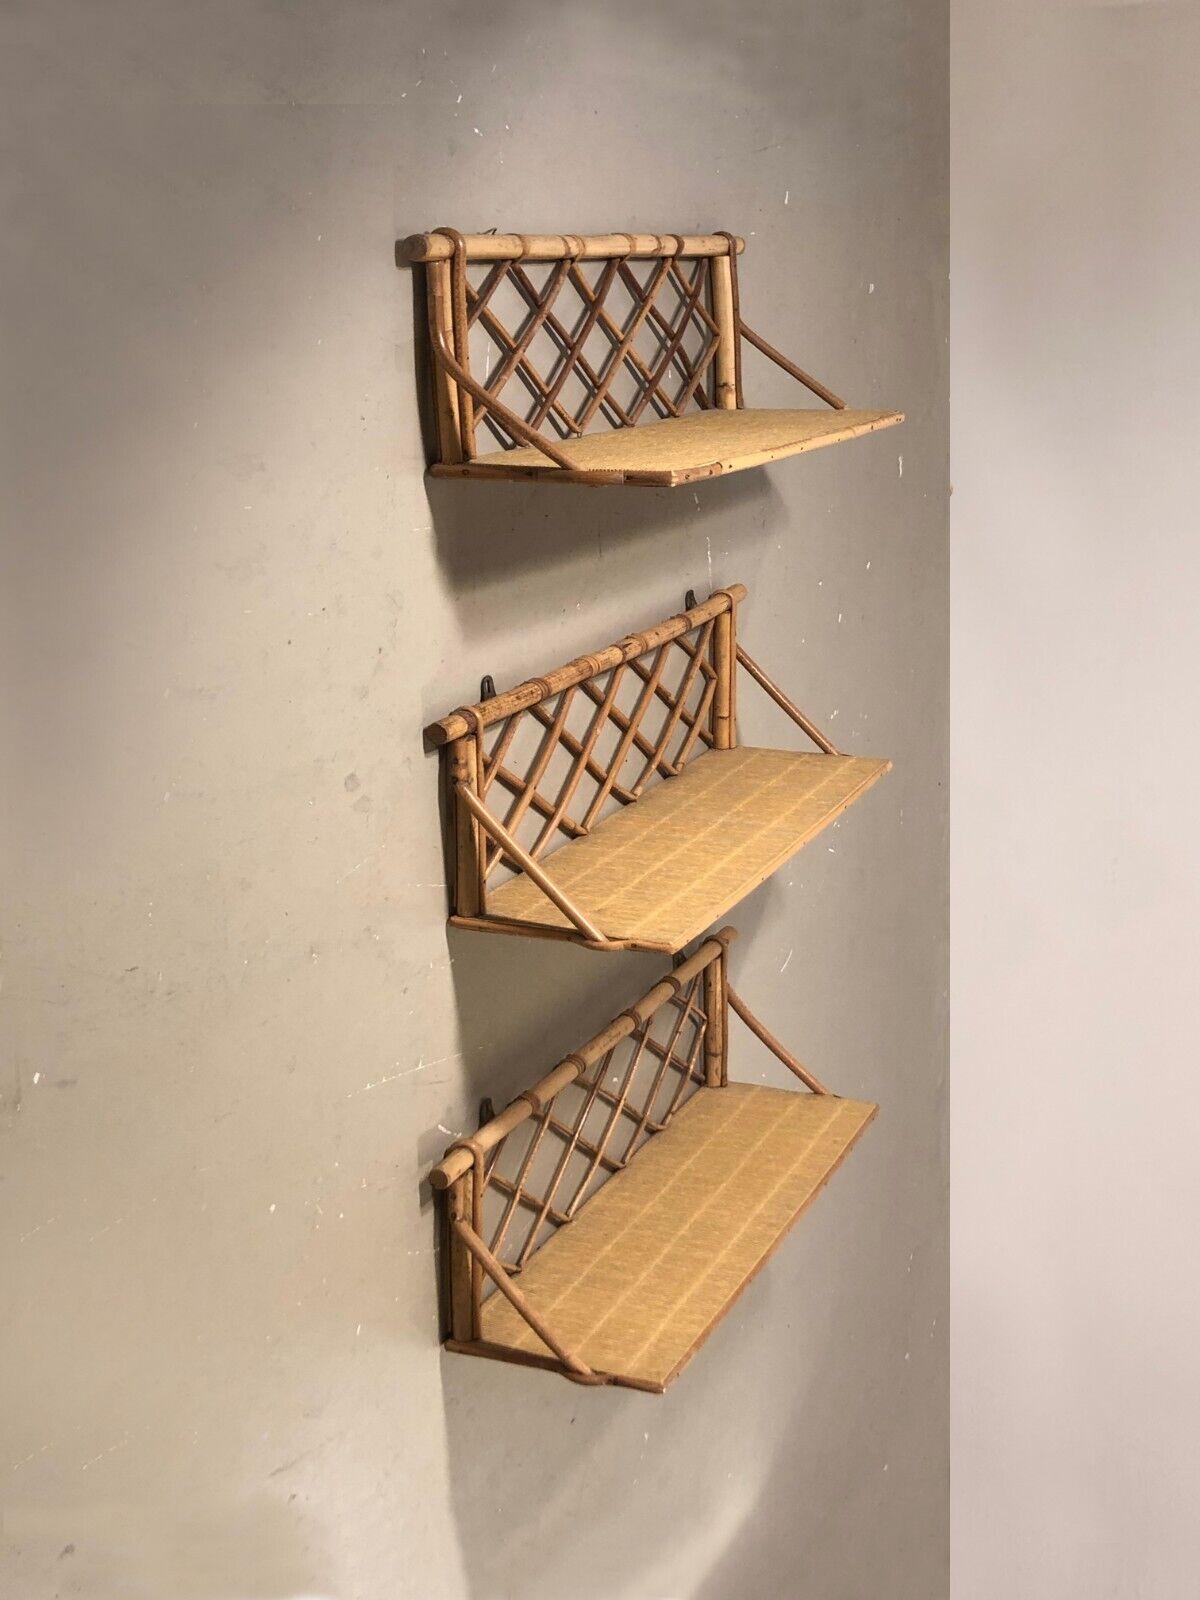 A very beautiful set of 3 small shelves with diamond decorations, Modernist, Free Form, Brutalist, Popular Art, rectangular wicker structures with rounded edges, wooden trays with a pale yellow texture, attributed to Adrien Audoux and Frida Minnet,